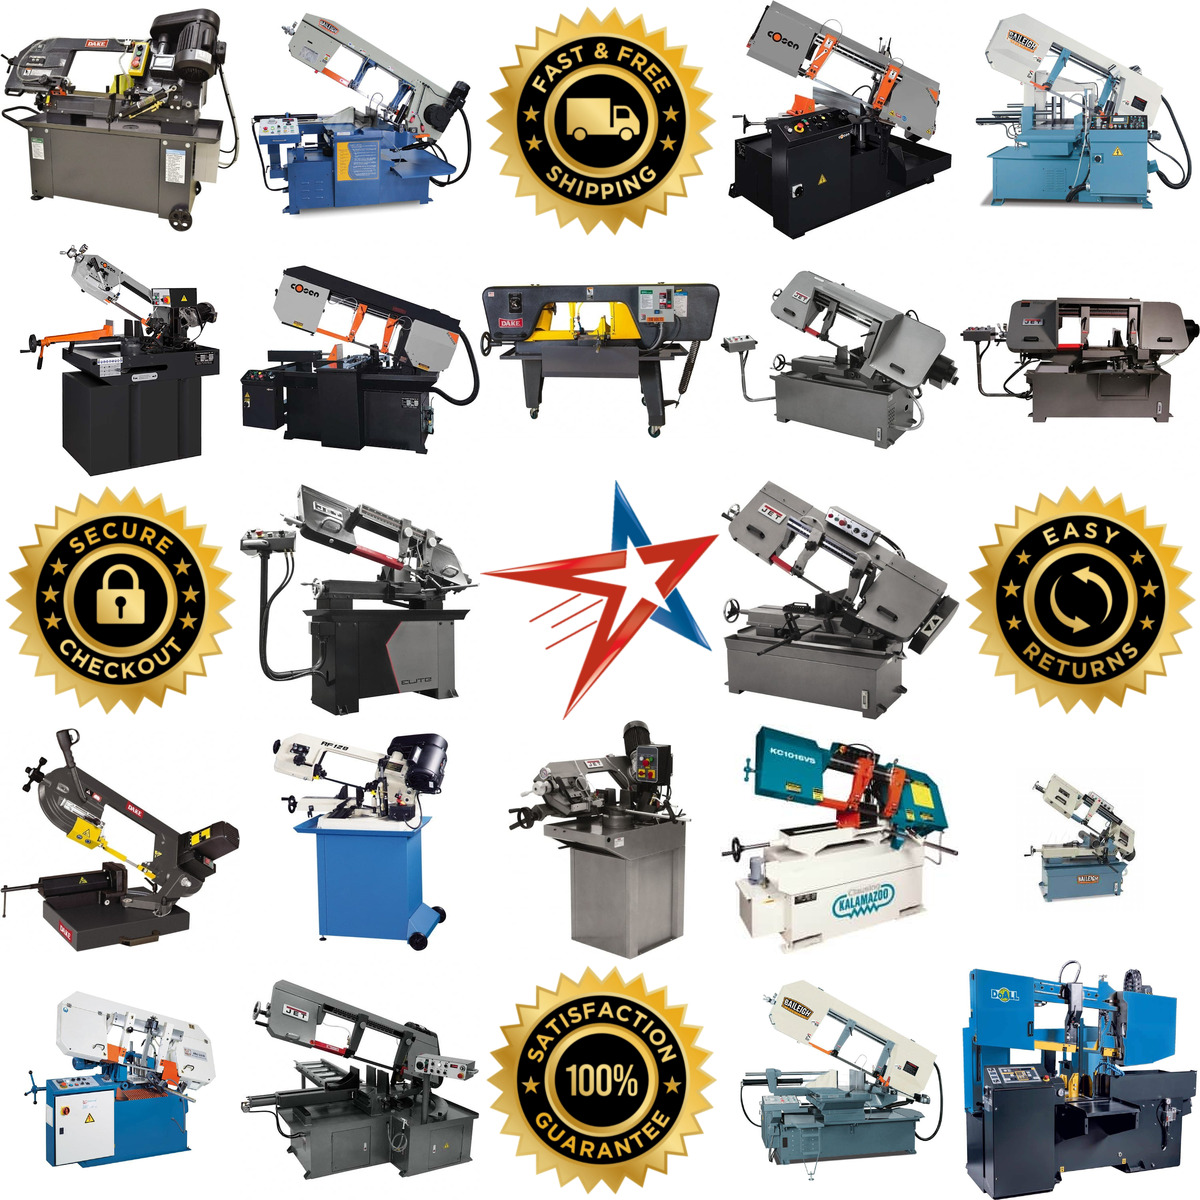 A selection of Horizontal Bandsaws products on GoVets